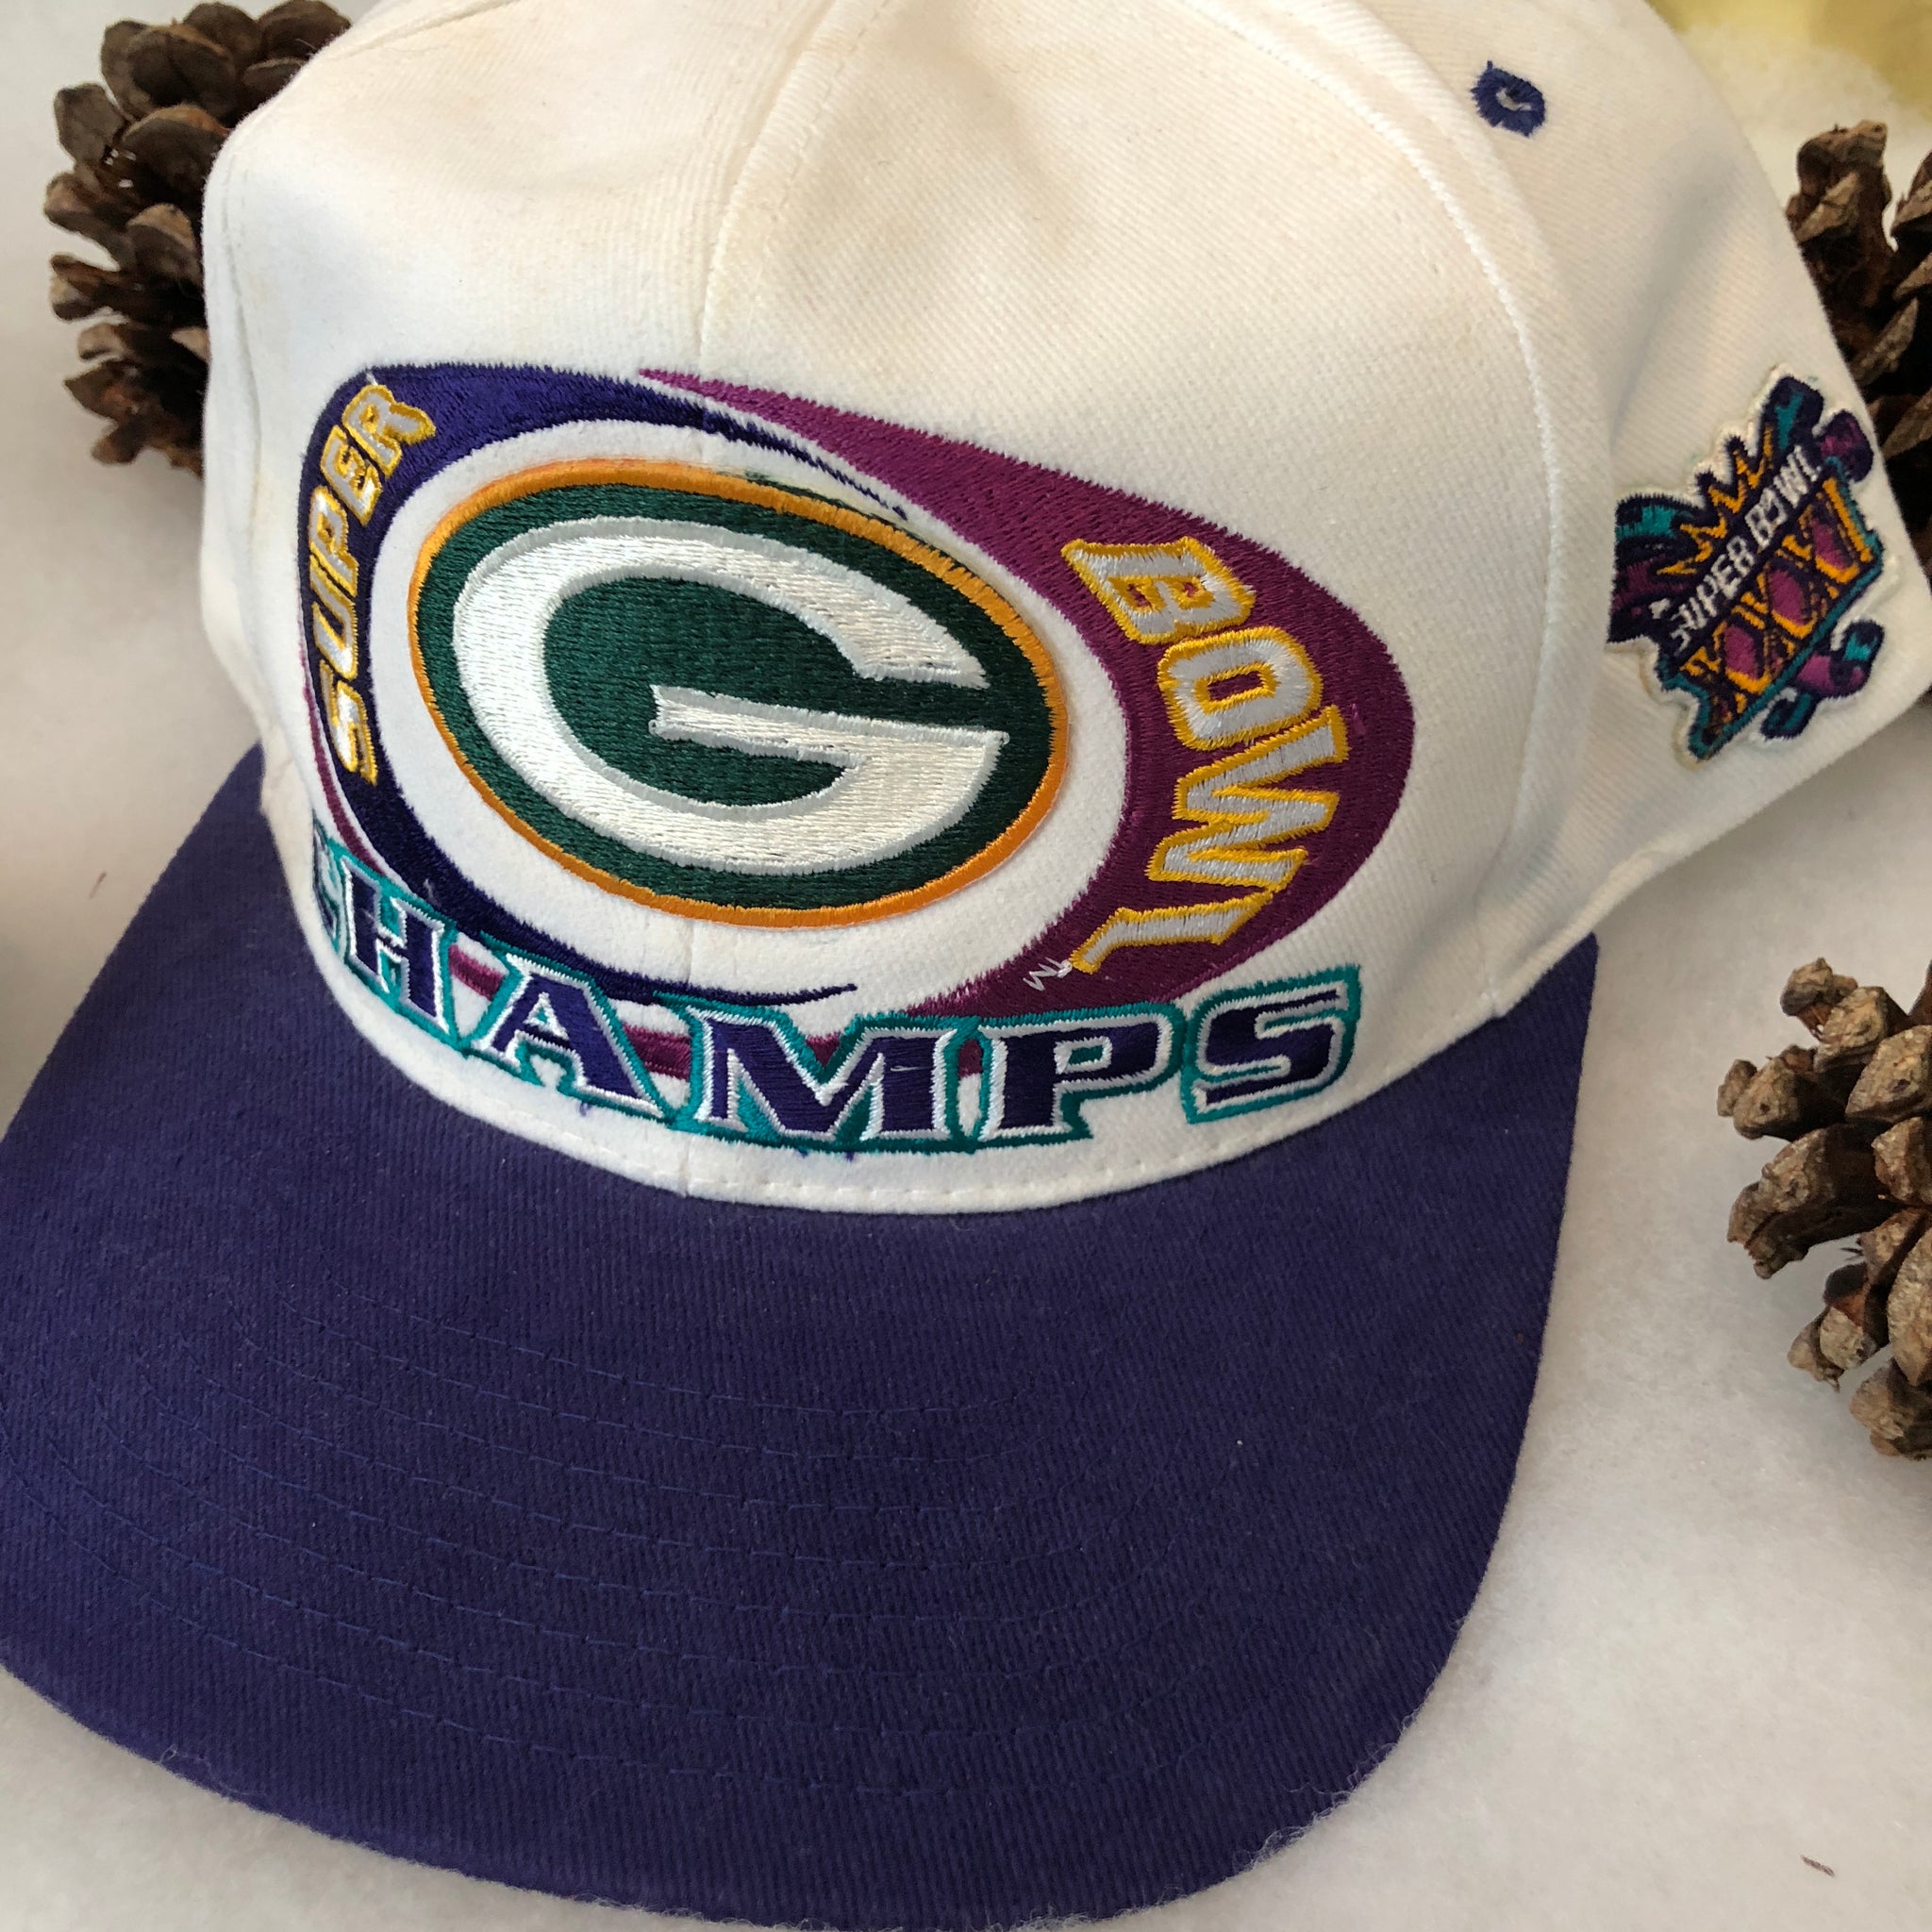 Vintage Starter NFL Super Bowl XXXI Champions Green Bay Packers Snapback Hat